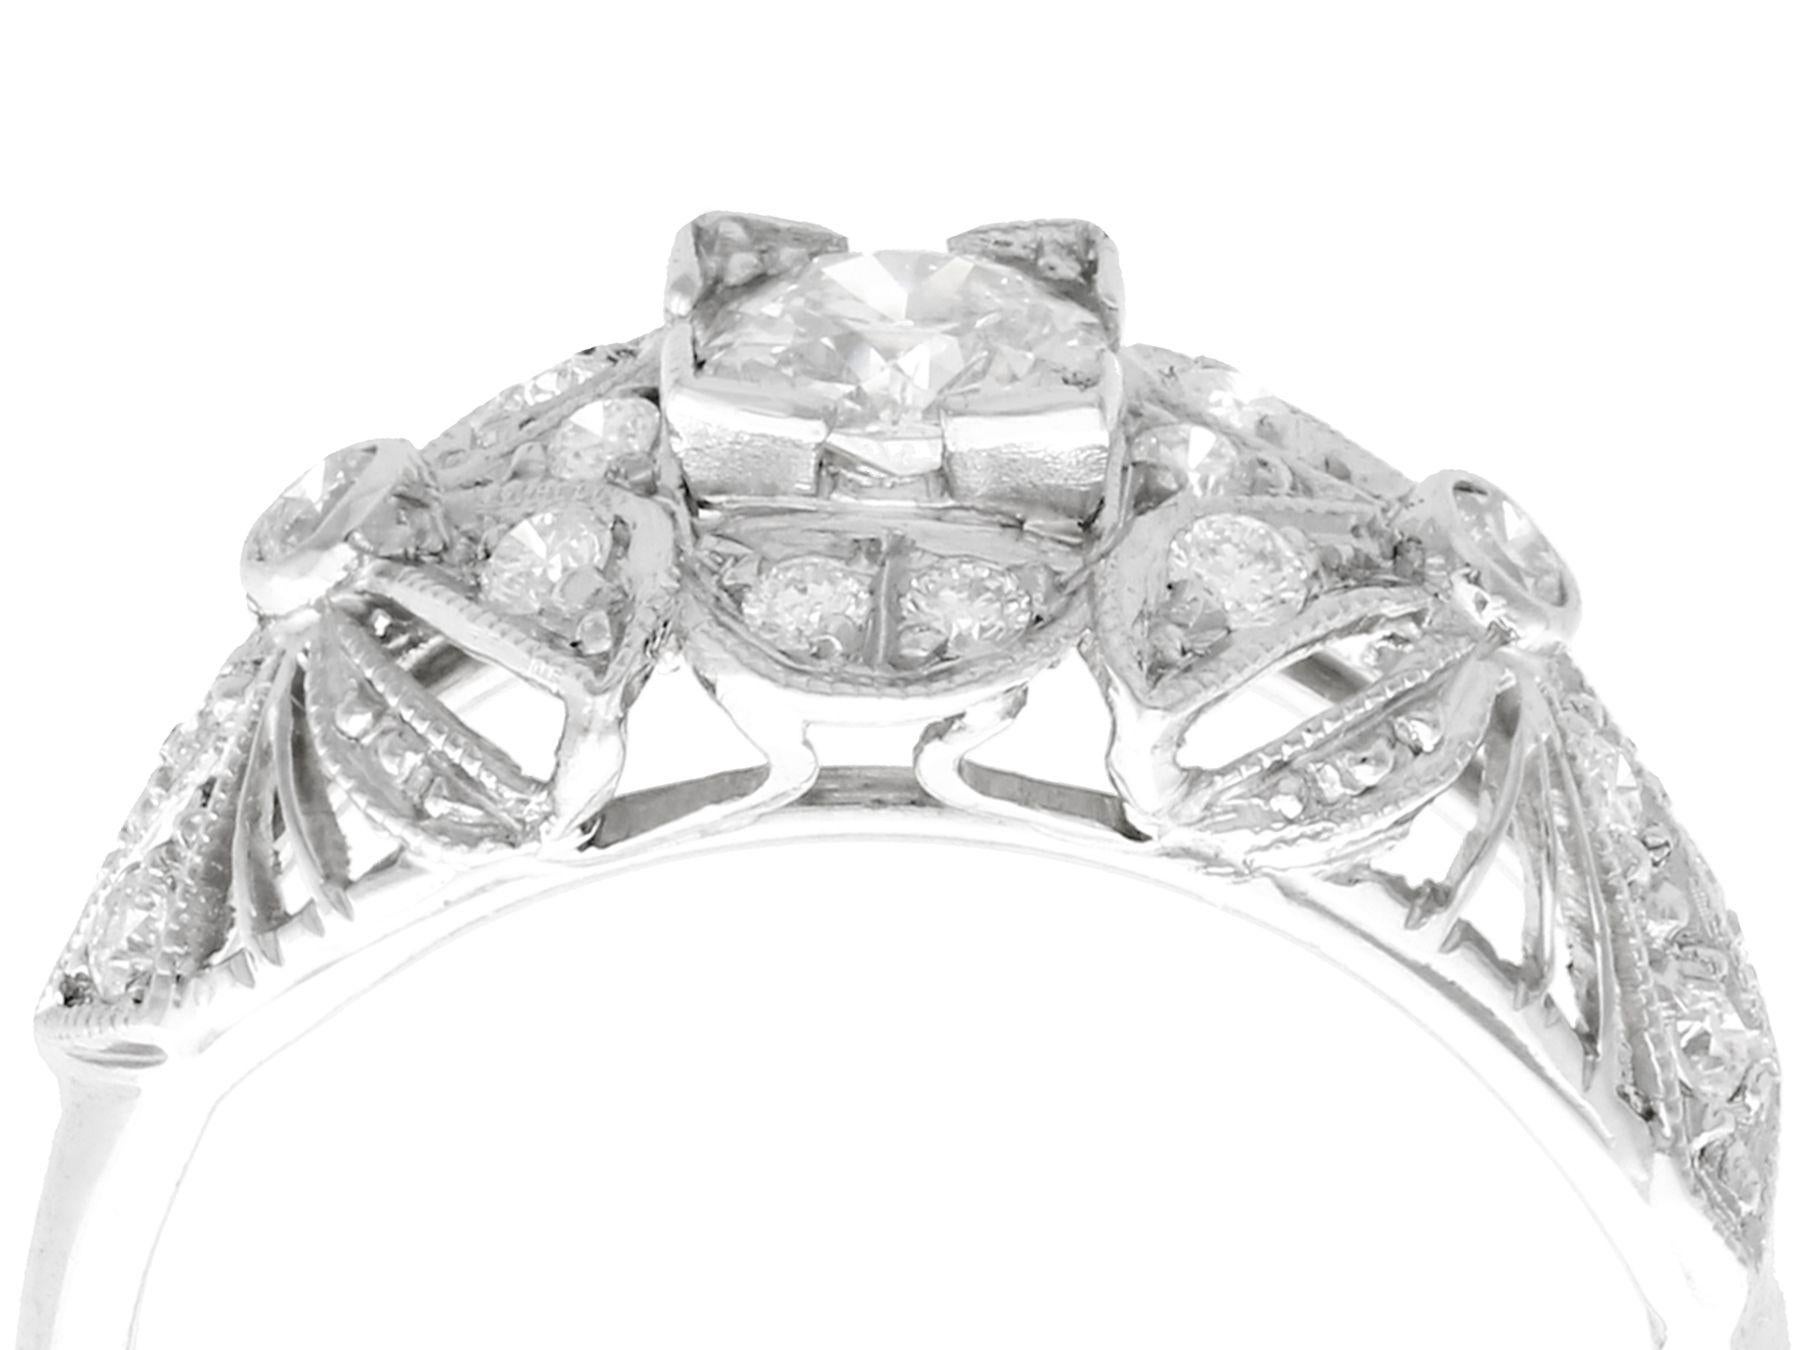 An impressive vintage 1950s 0.65 carat diamond and platinum dress ring; part of our diverse diamond jewelry collections.

This fine and impressive vintage 1950s diamond ring has been crafted in platinum.

The ornate pierced decorated design displays